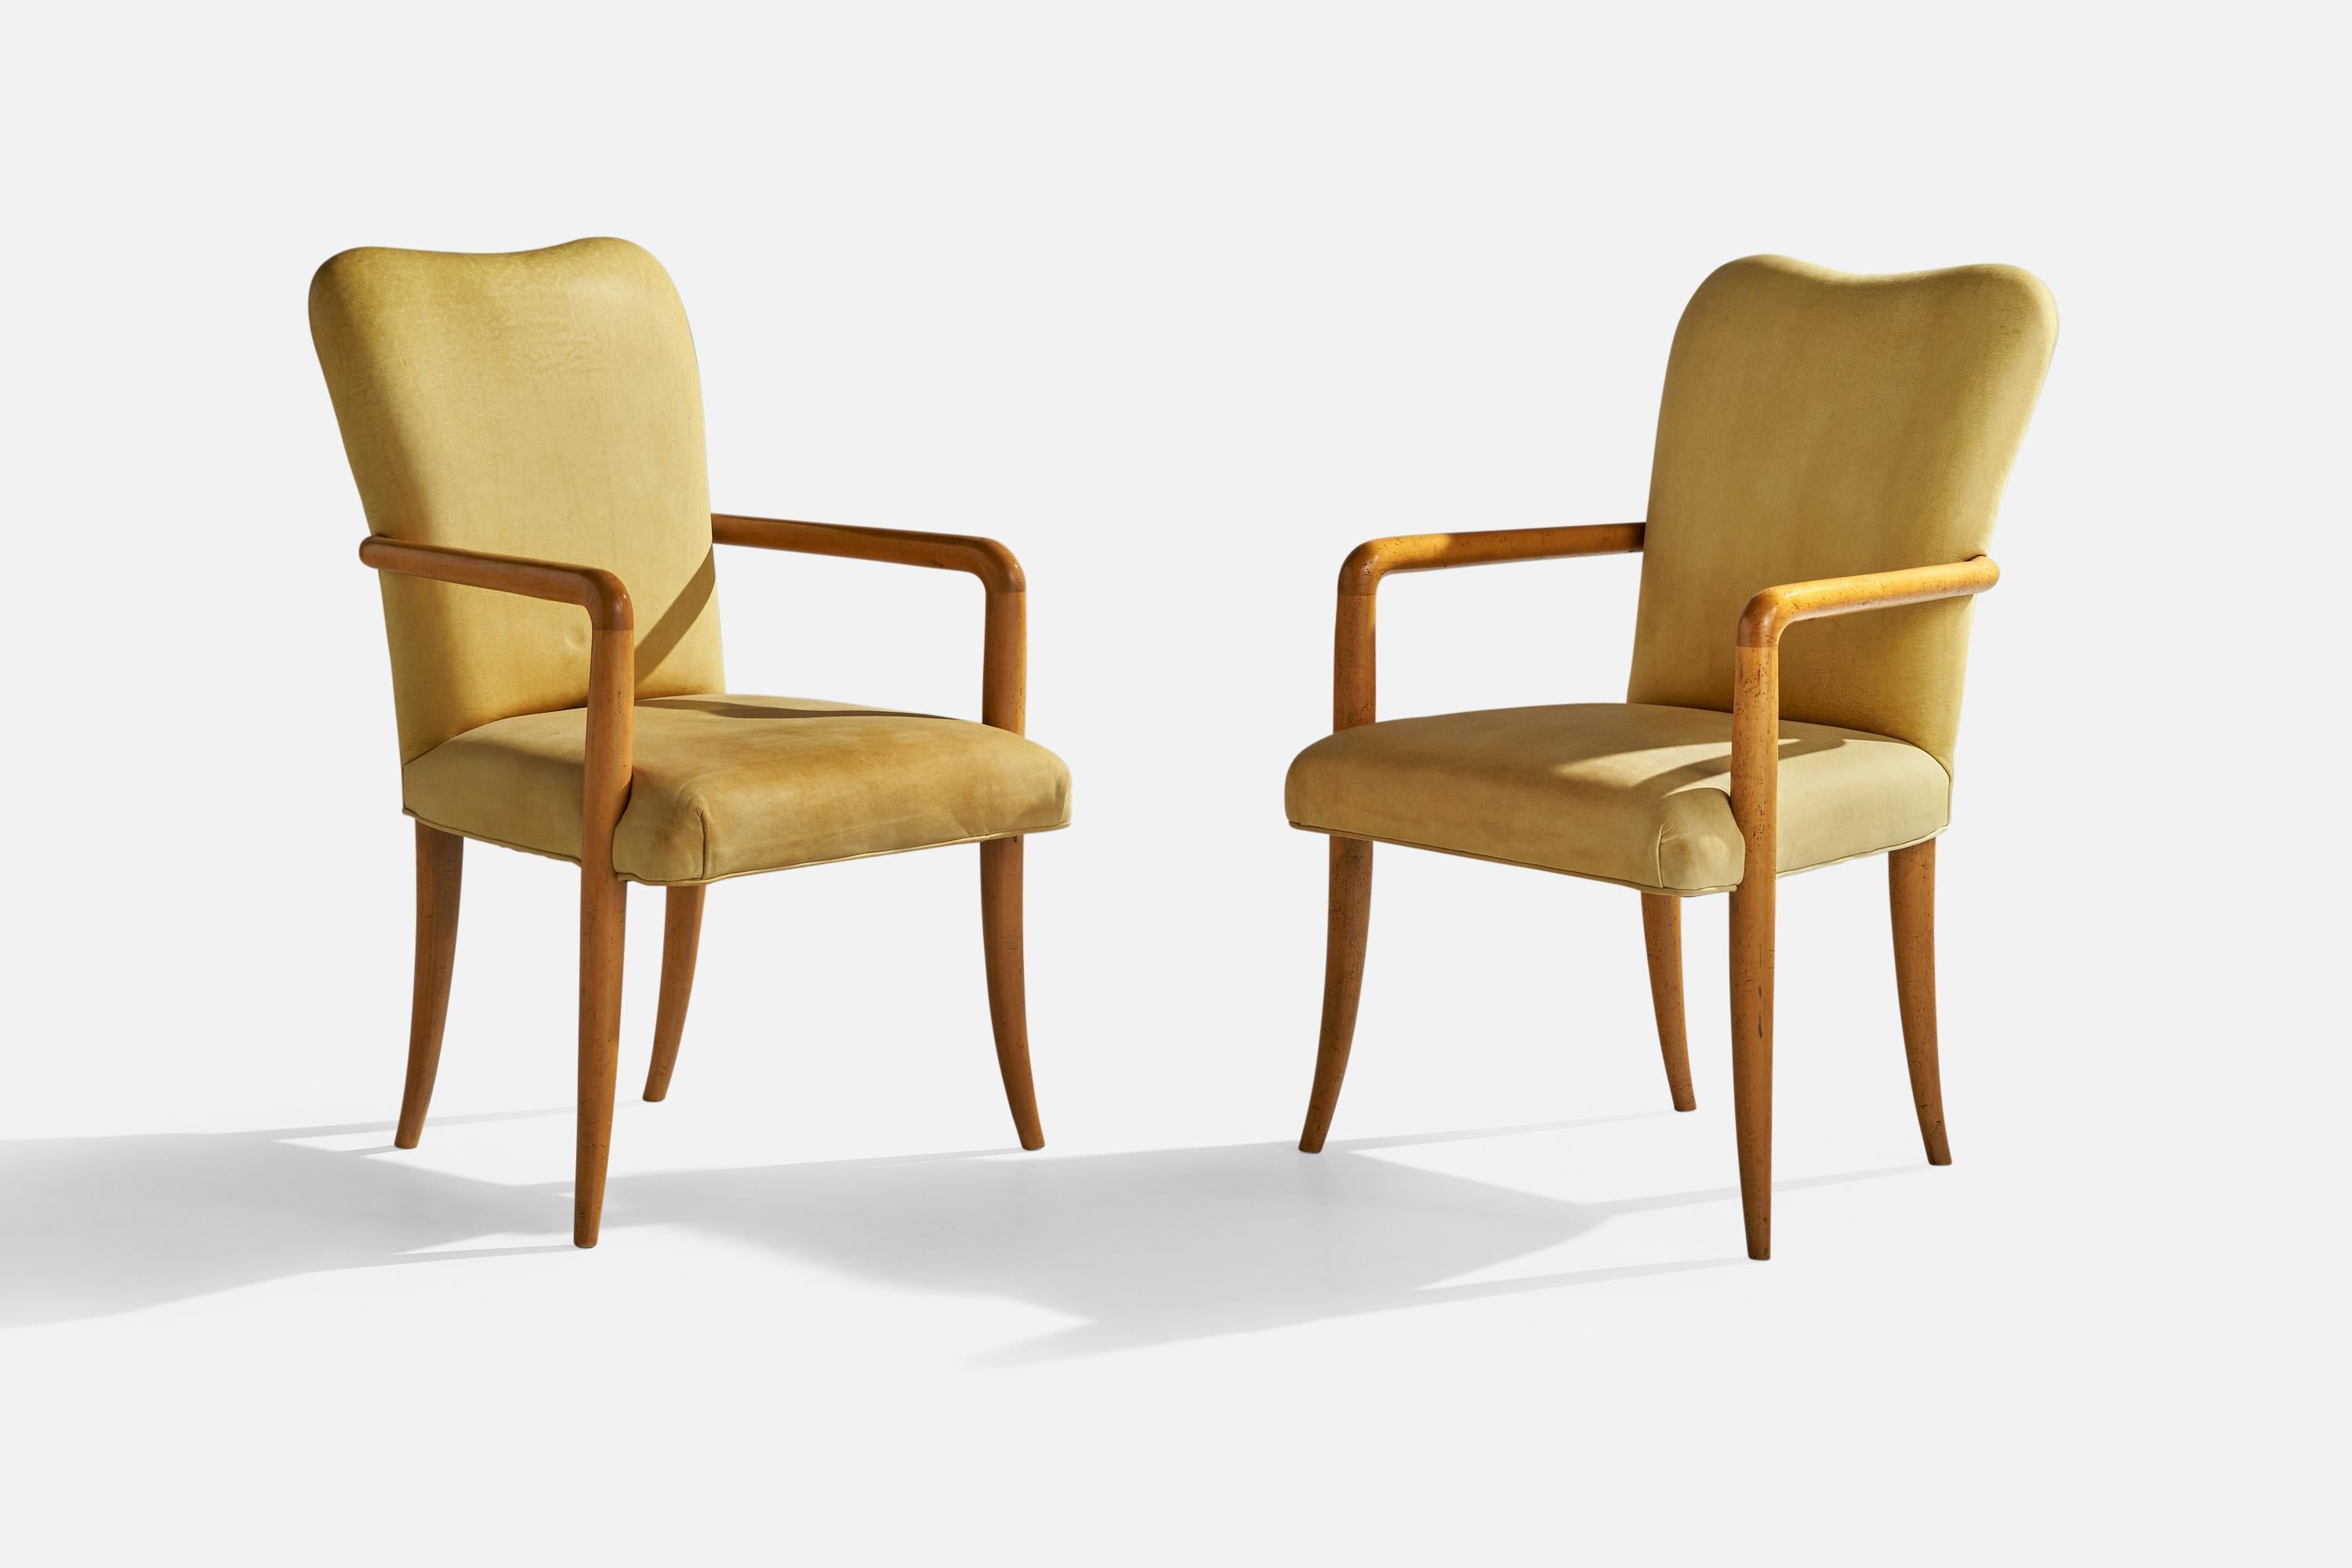 A pair of wood and yellow beige leather armchairs designed and produced by Milling Road, USA, 1990s.

Seat height 19”